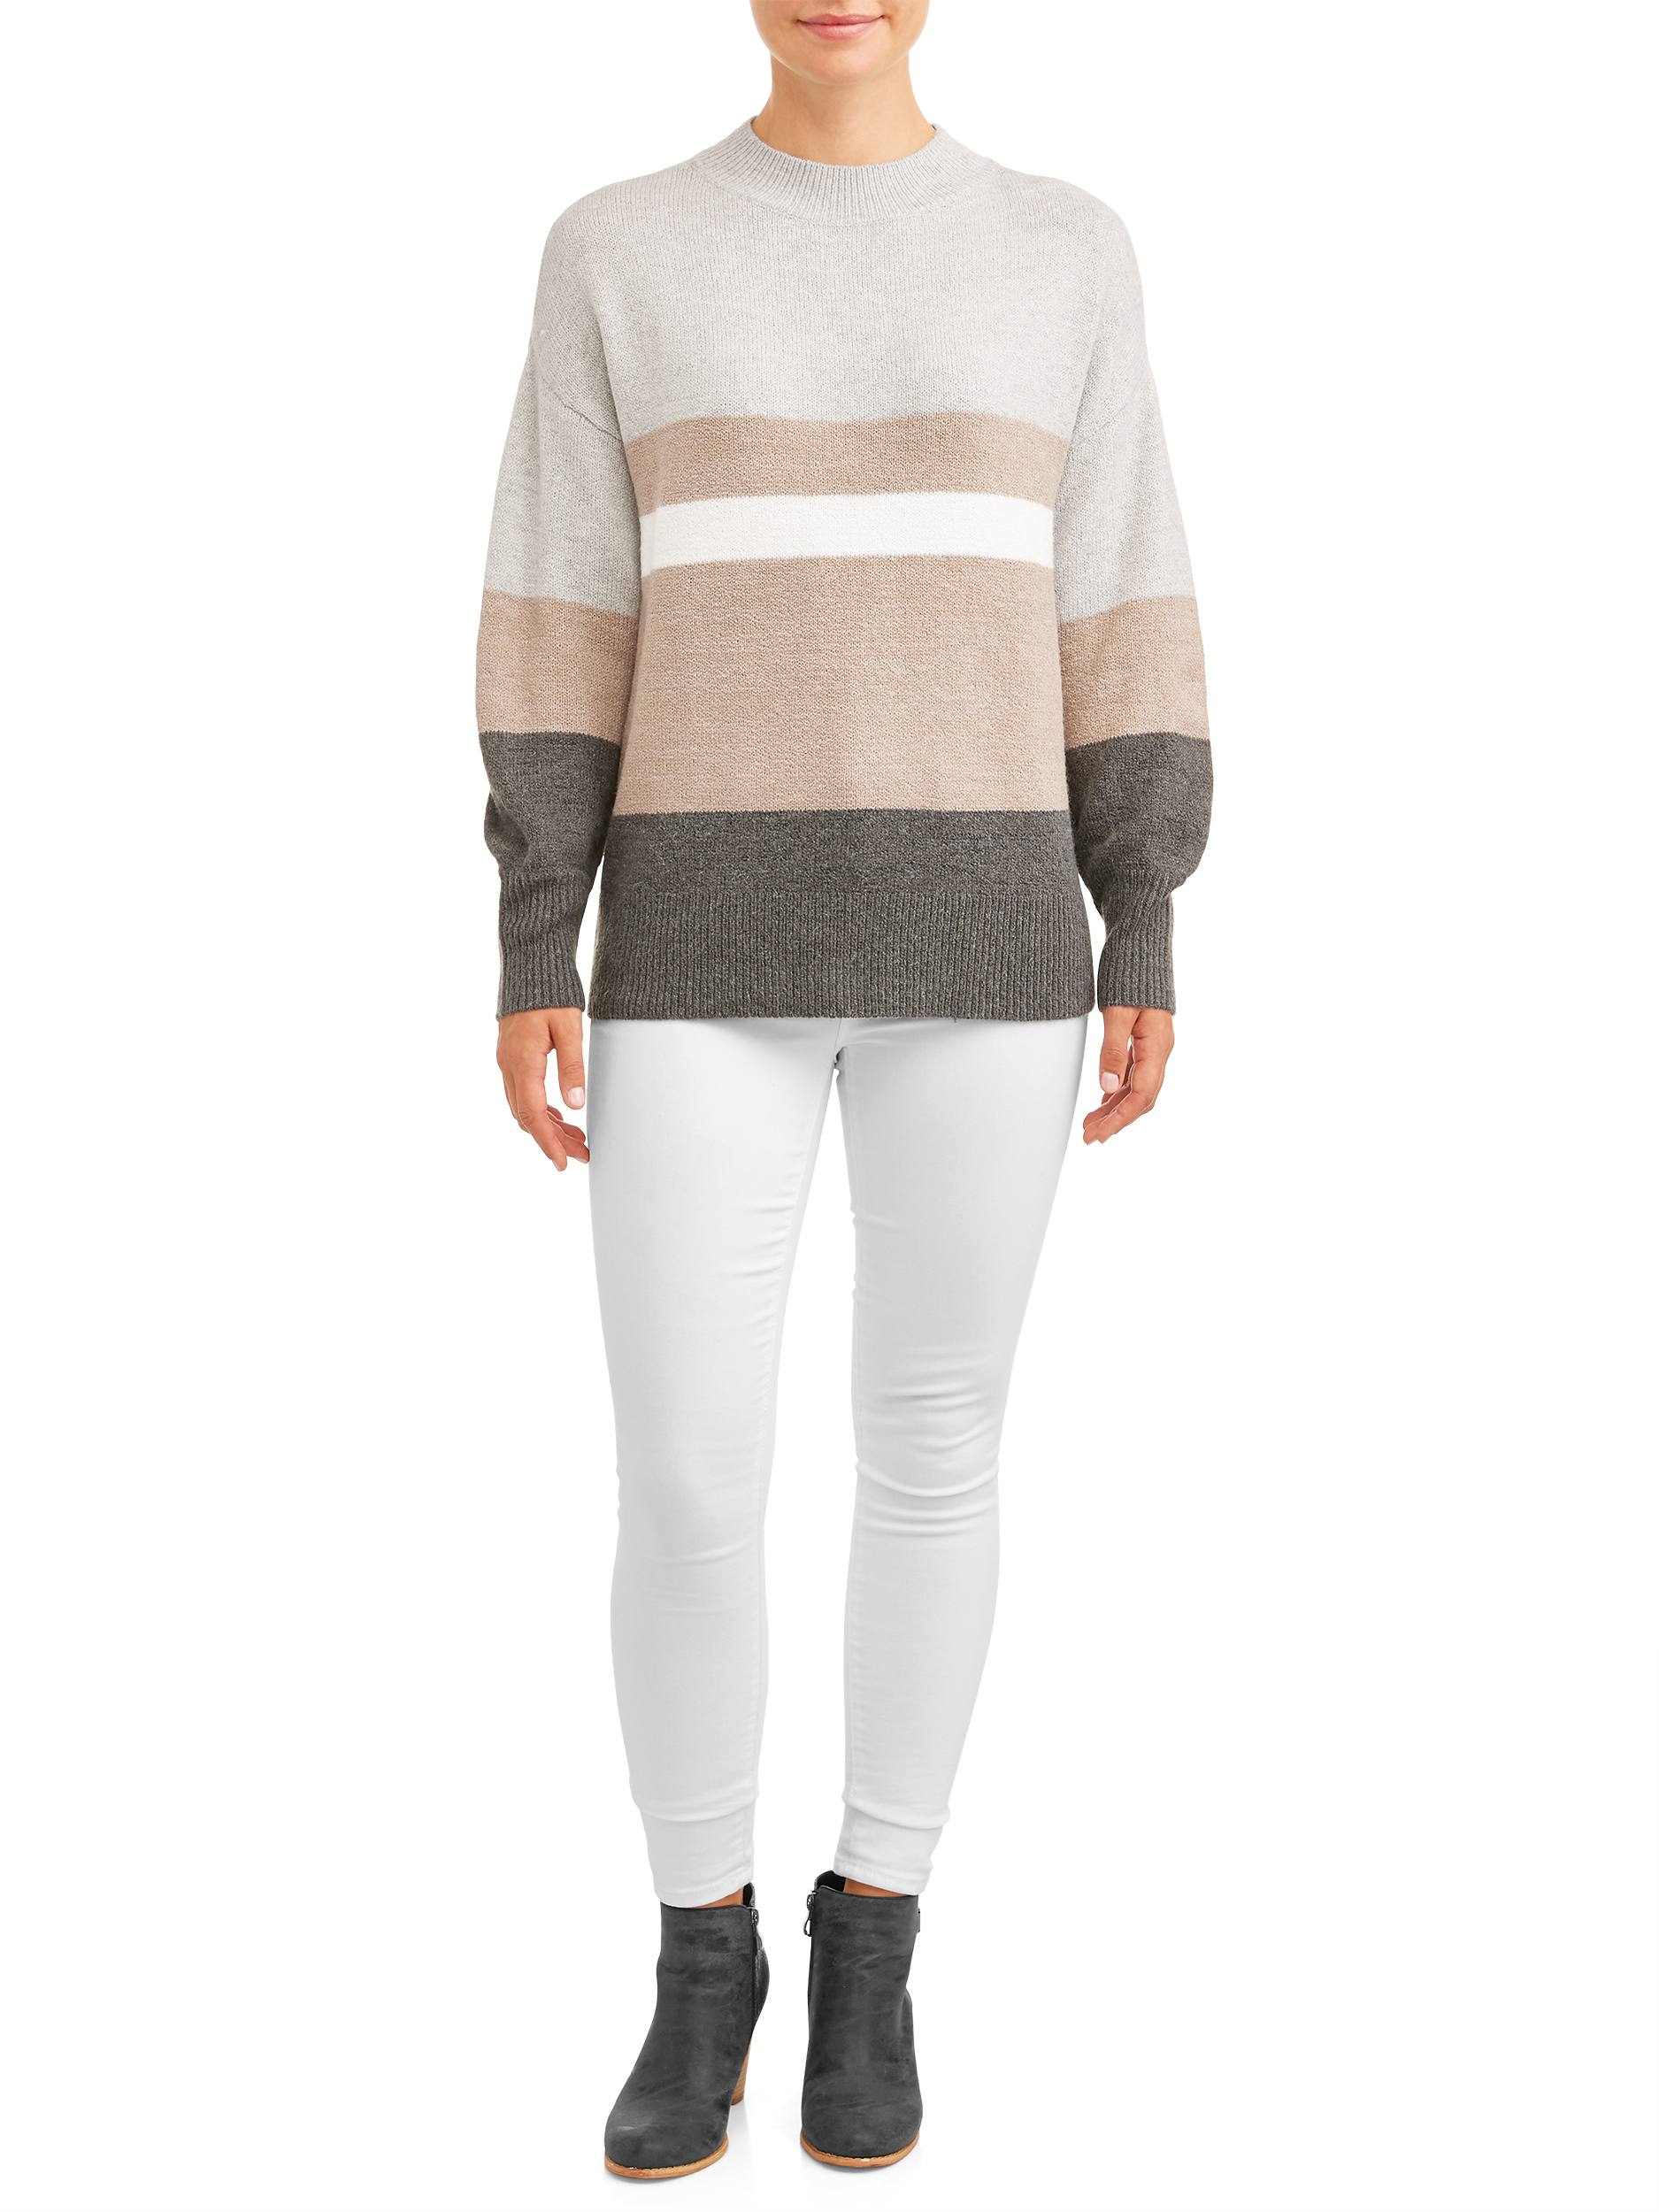 Time and Tru Women's Mock Neck Tunic Sweater - image 2 of 5